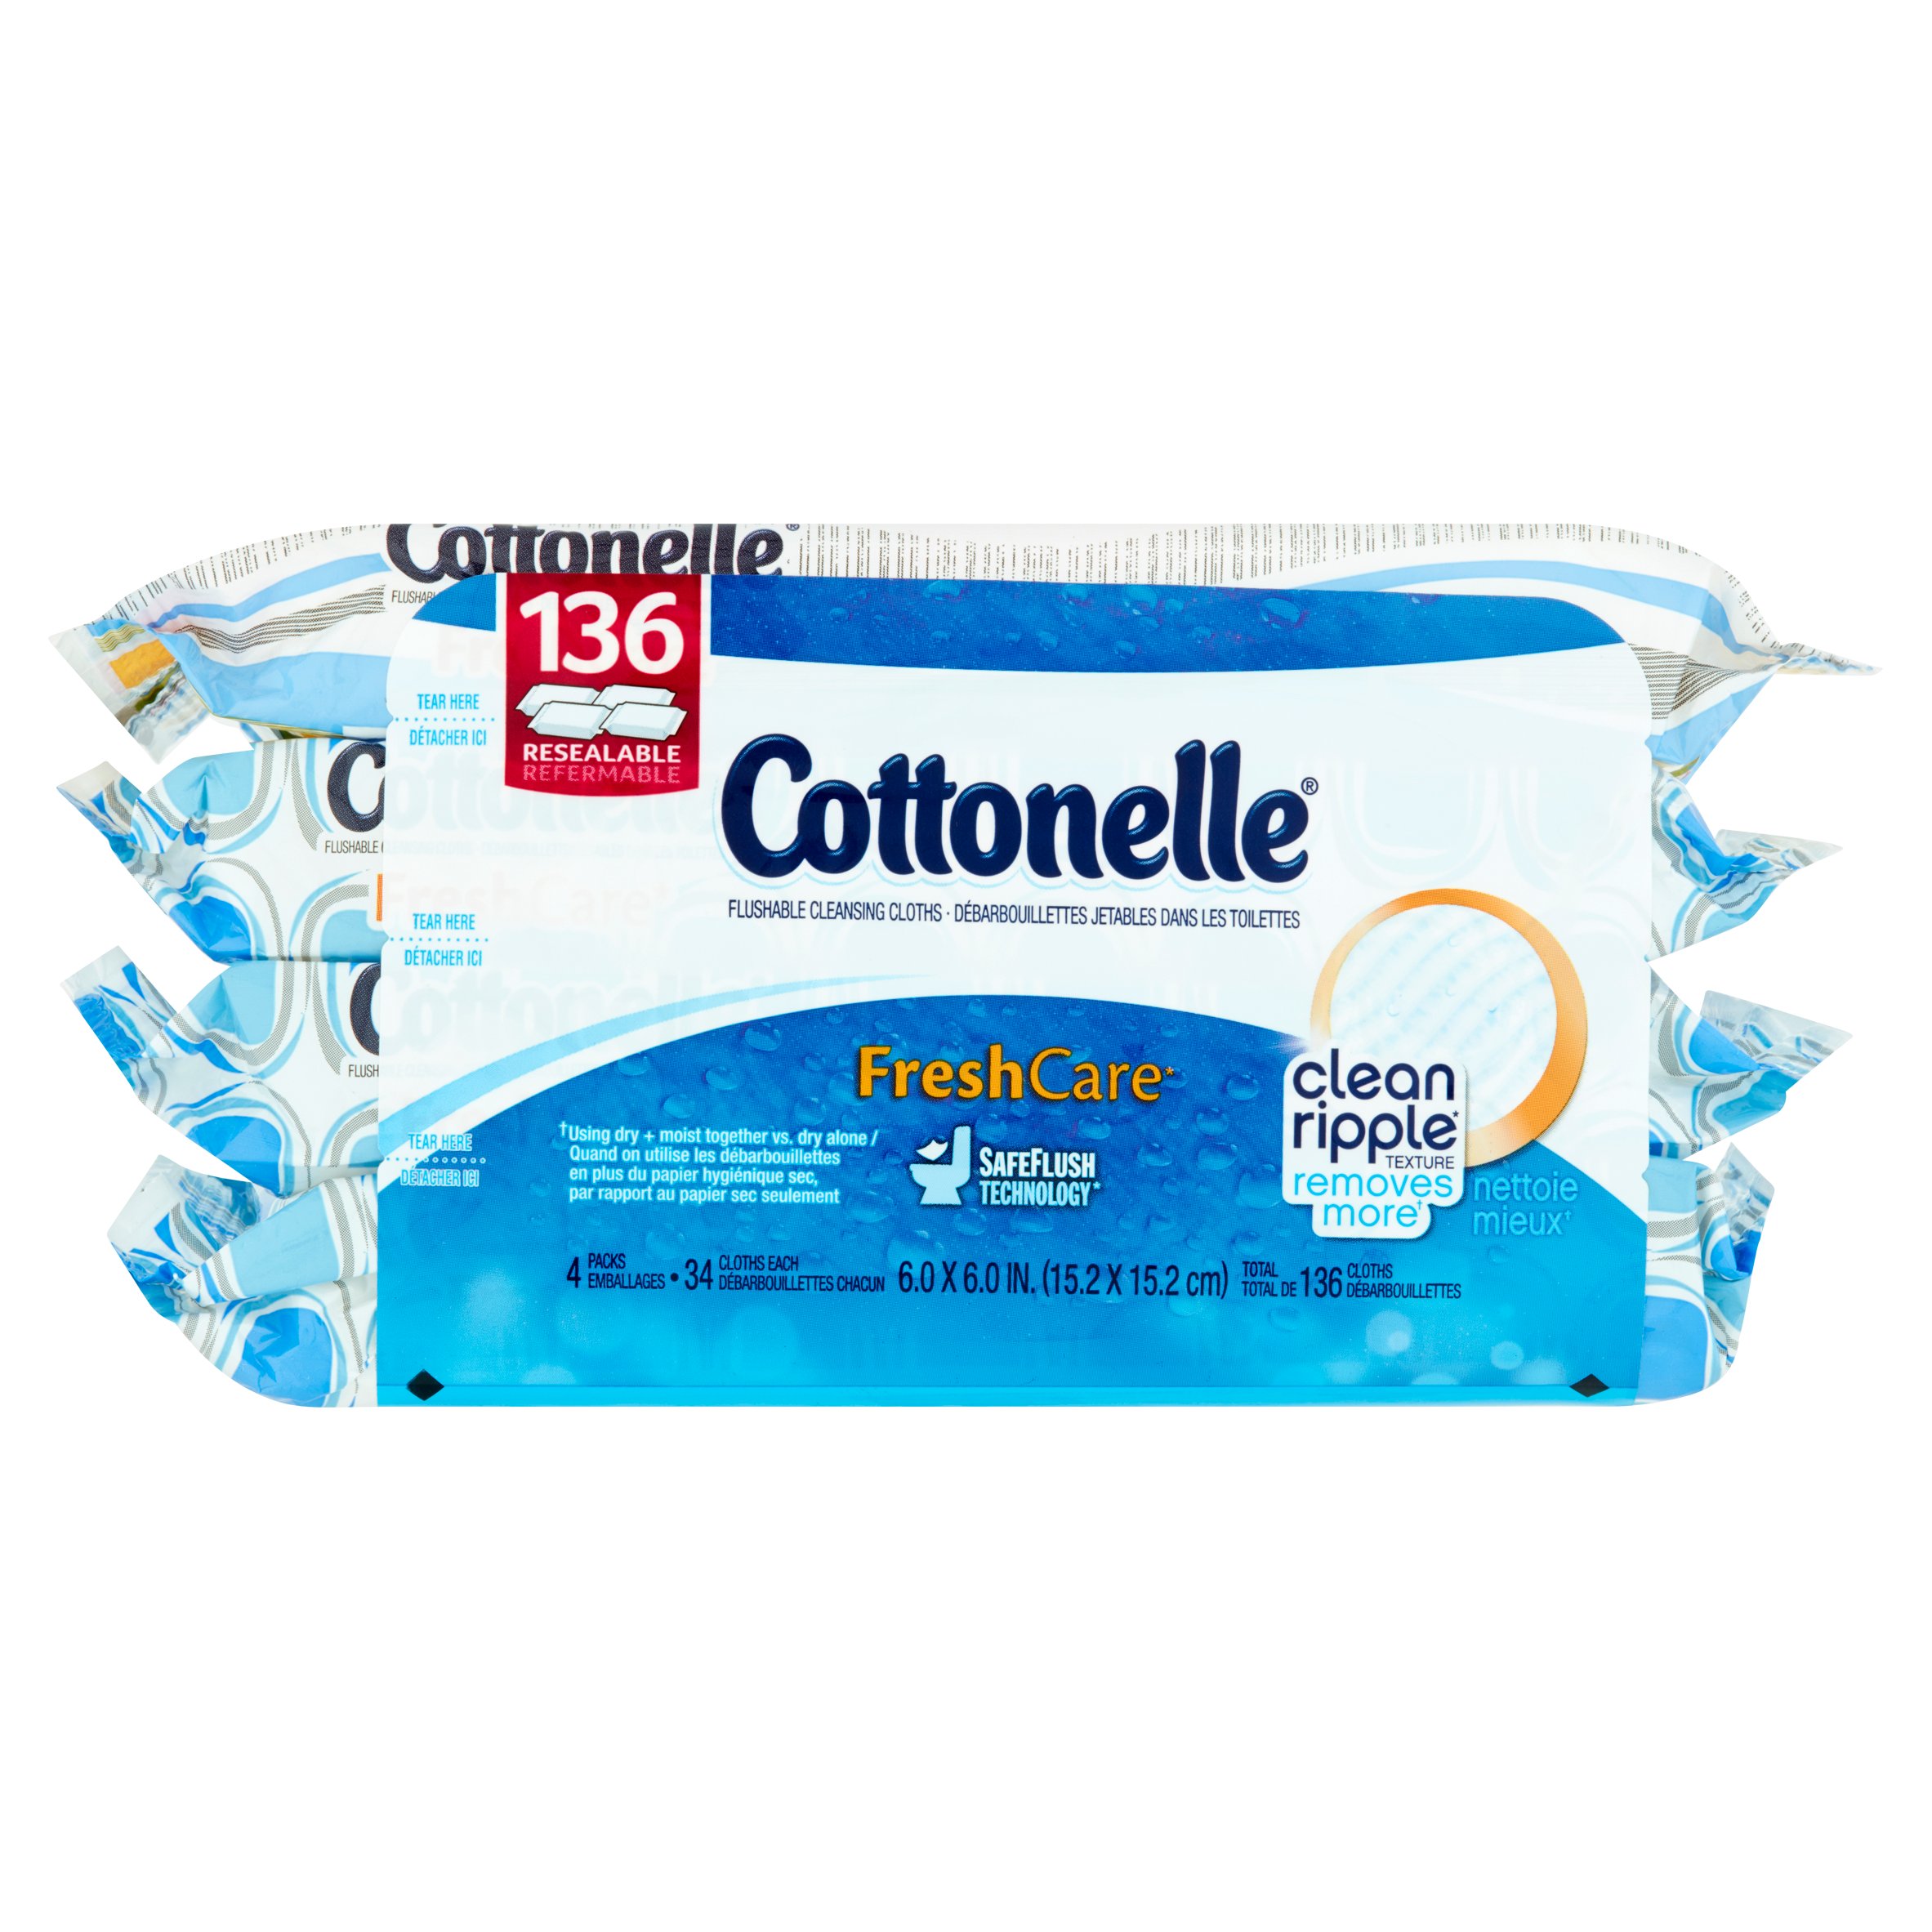 Cottonelle FreshCare Flushable Cleansing Cloths, 136 count, 4 pack - image 1 of 6